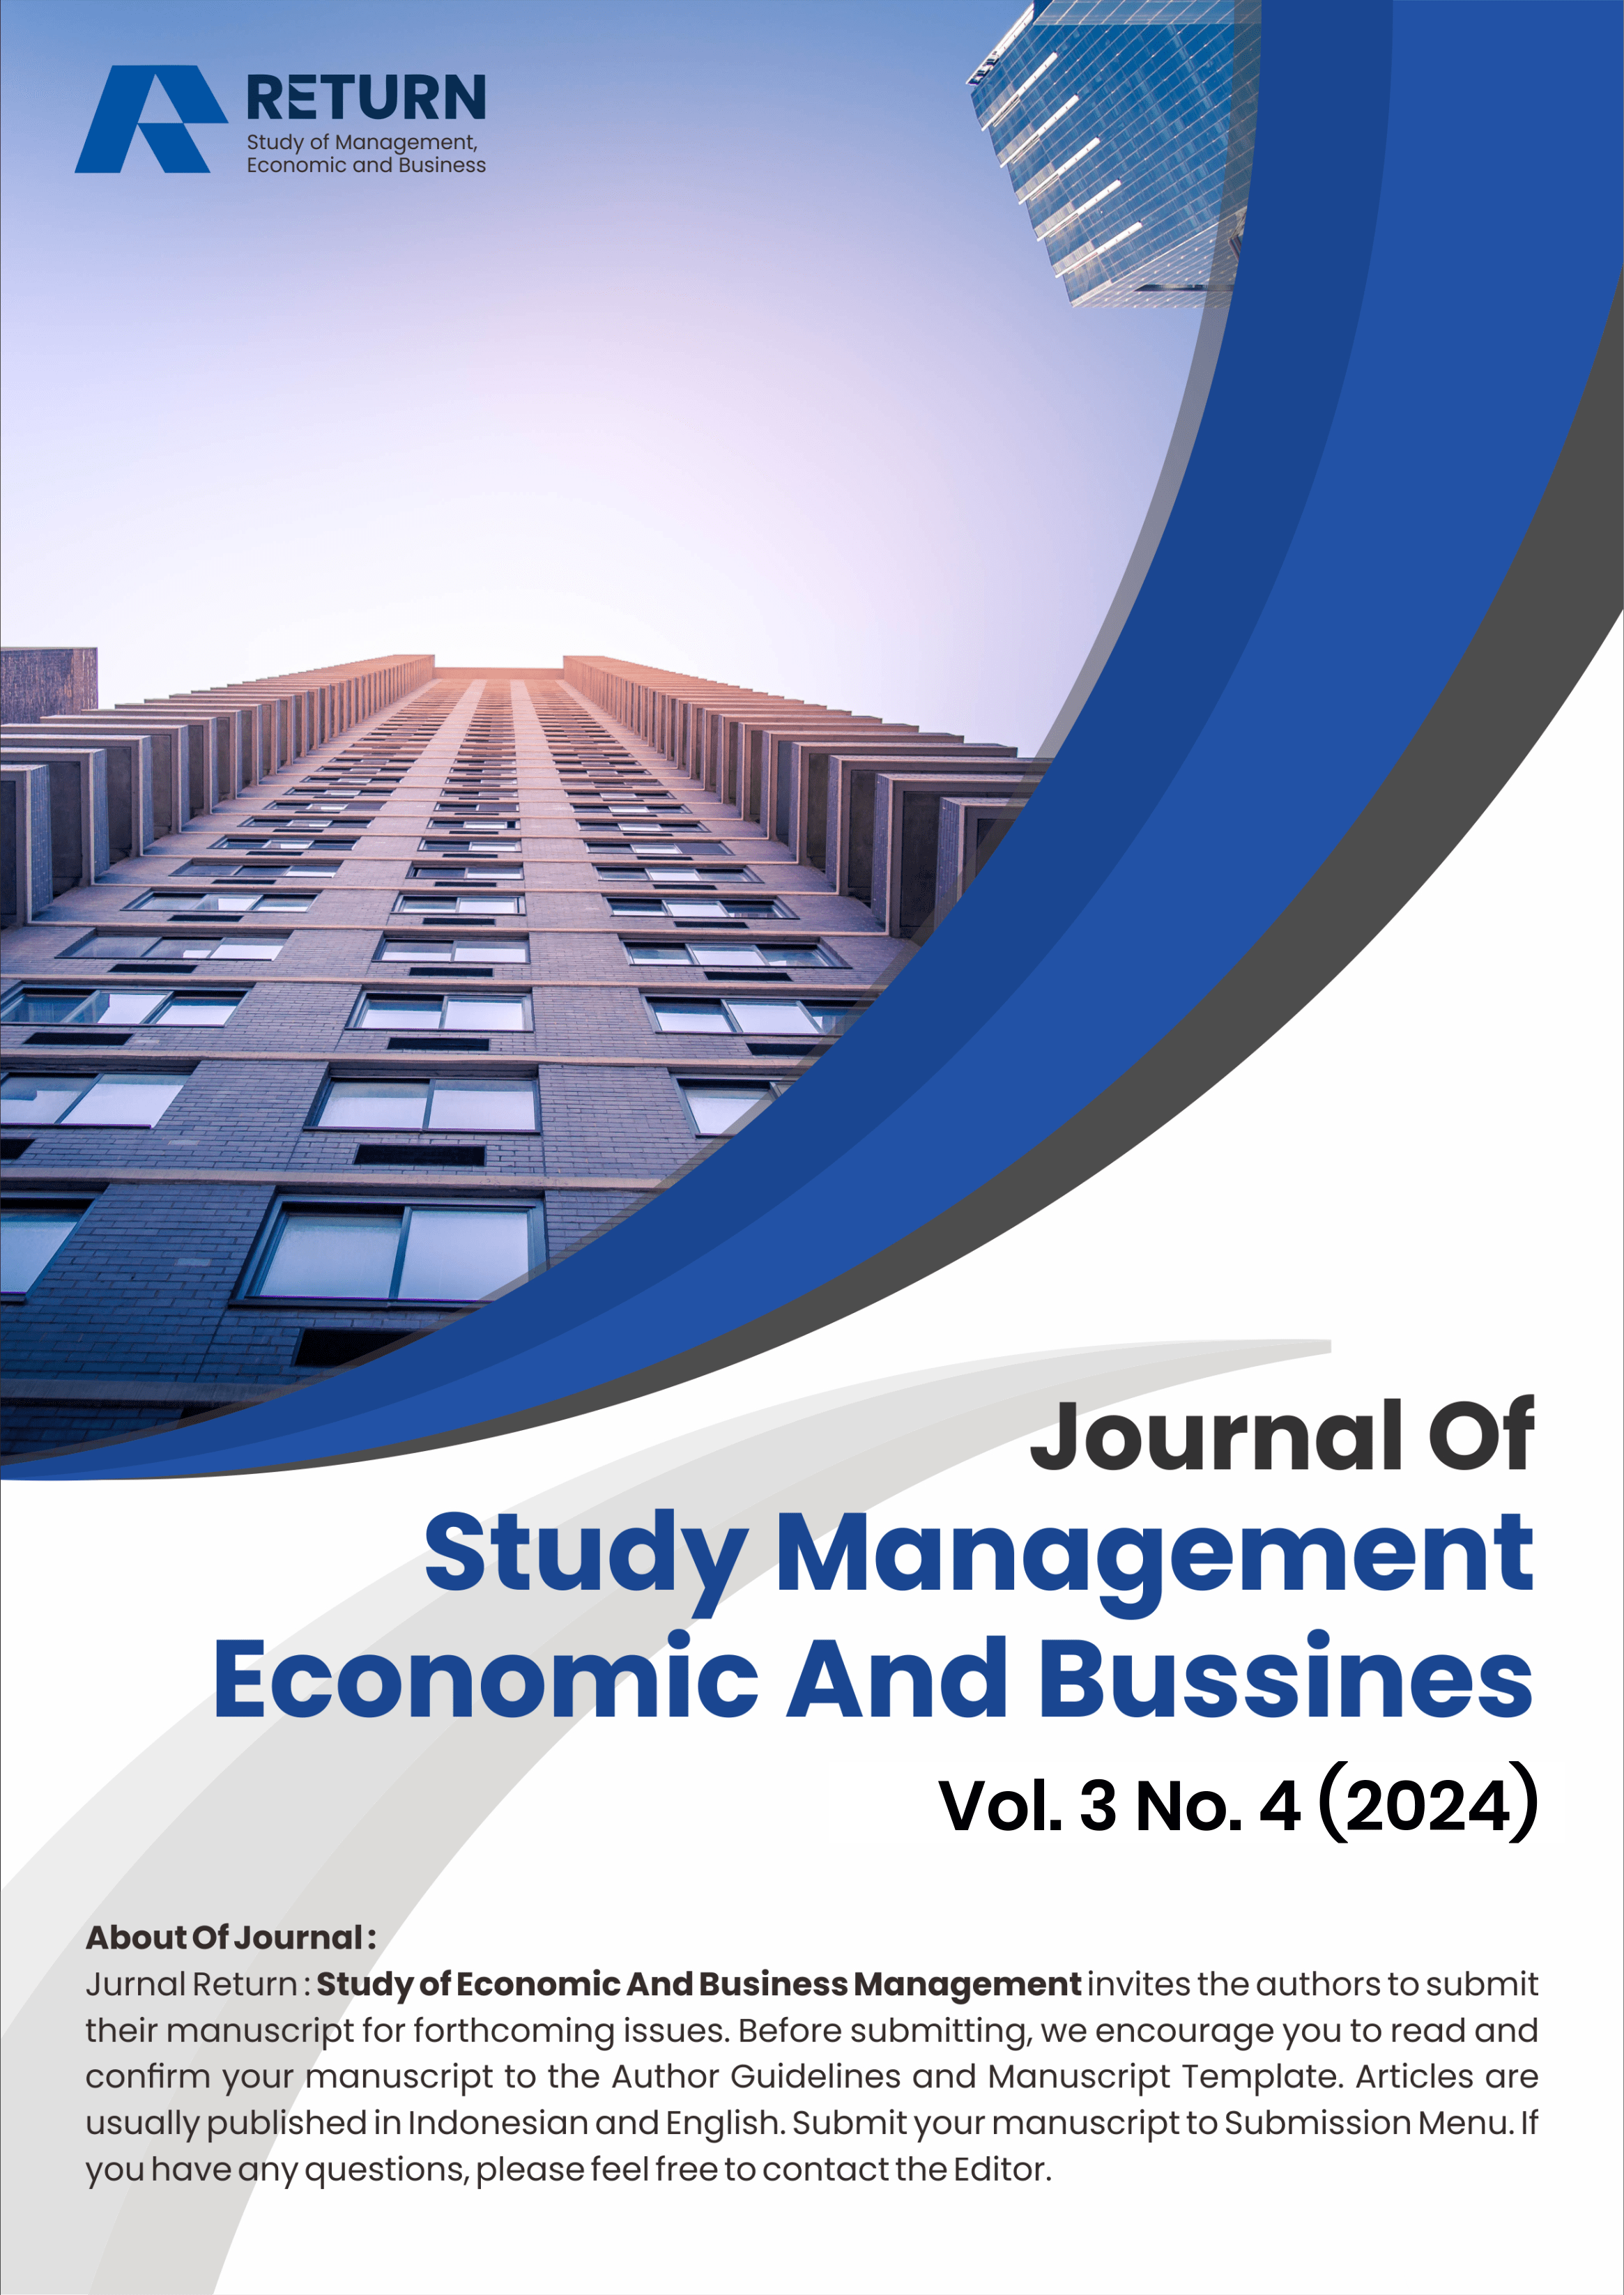 								View Vol. 3 No. 4 (2024): Return : Study of Management, Economic And Bussines
							